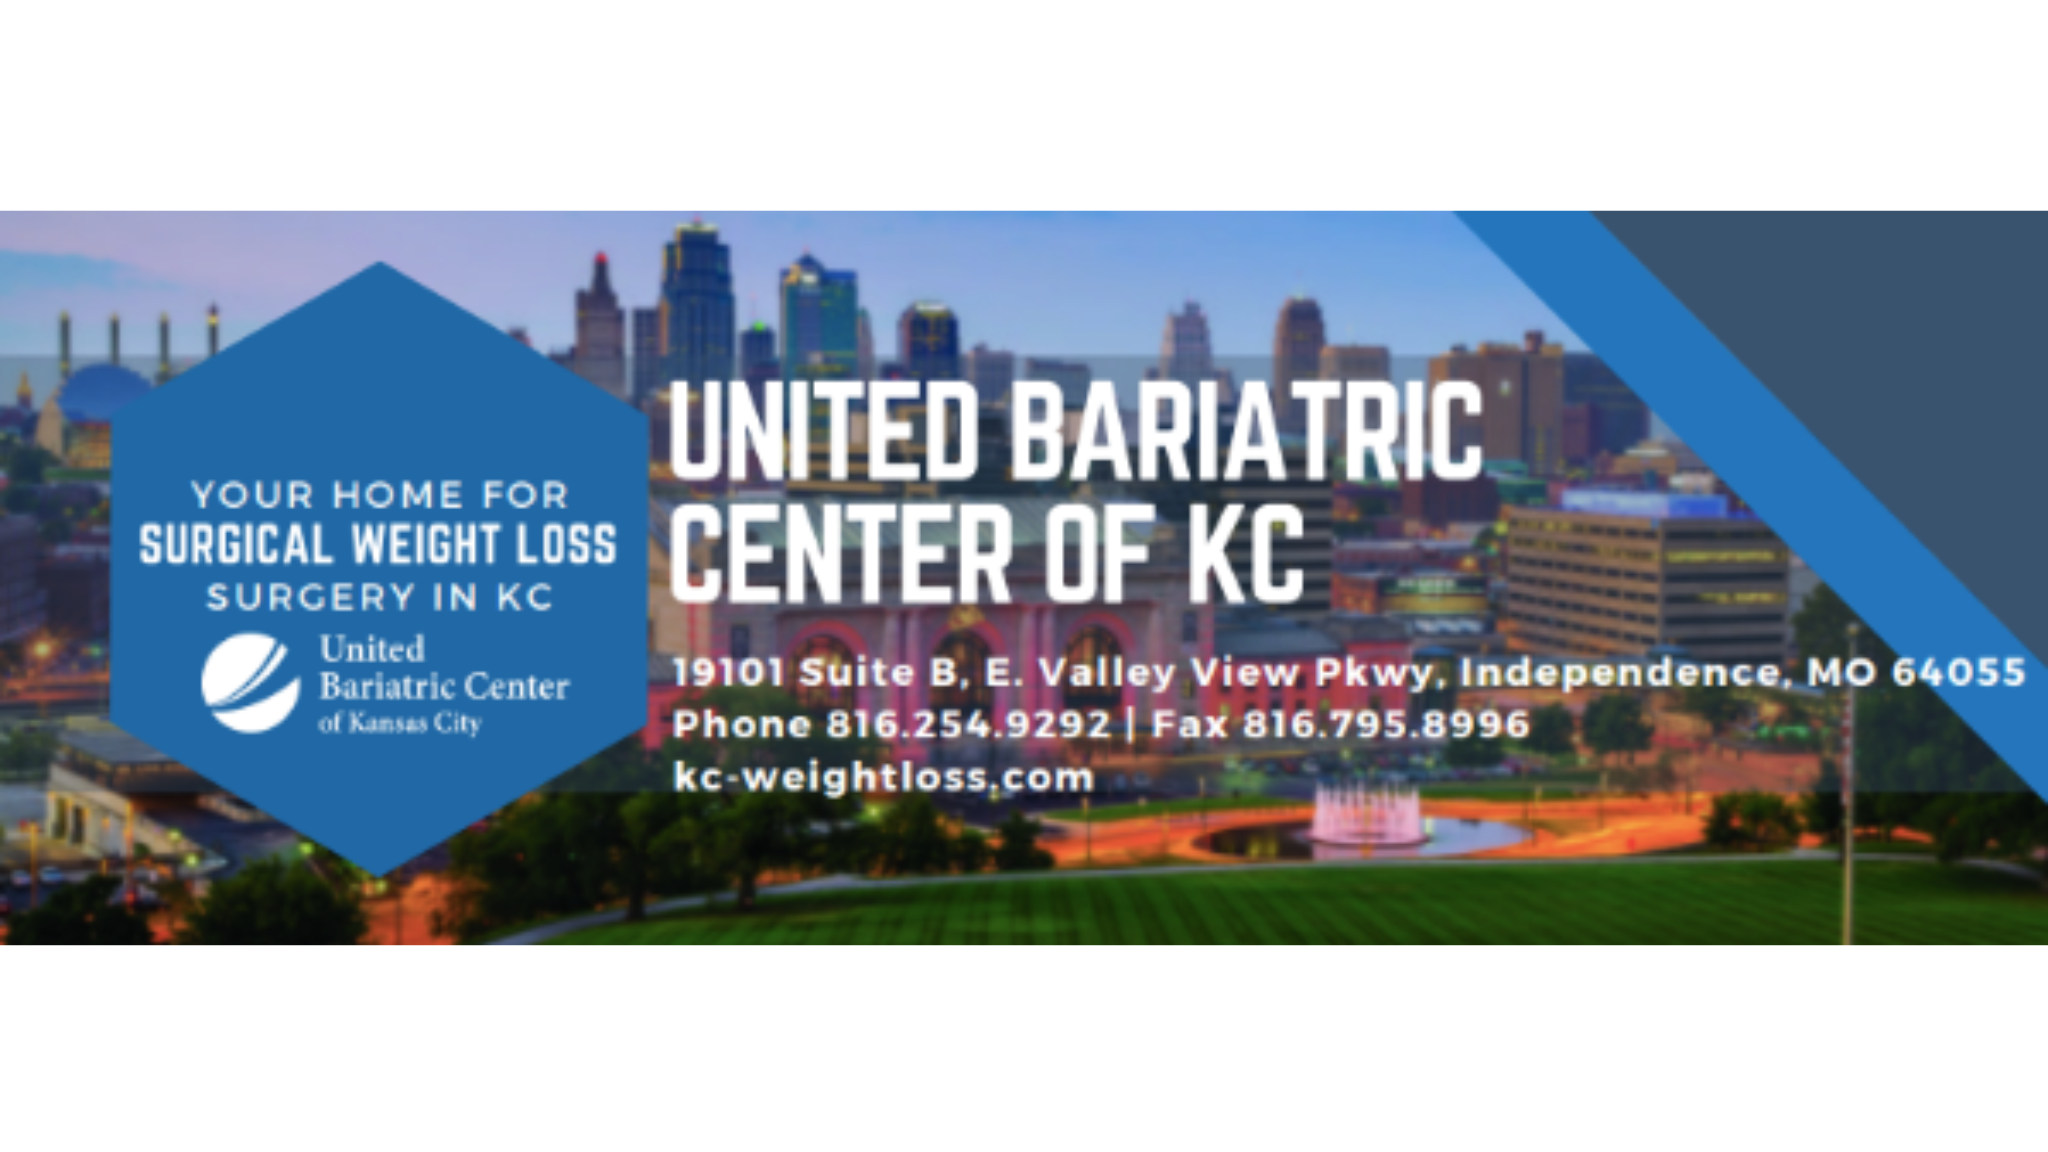 United Bariatric Center of Kansas City reviews | 19101 D, E Valley View Pkwy - Independence MO